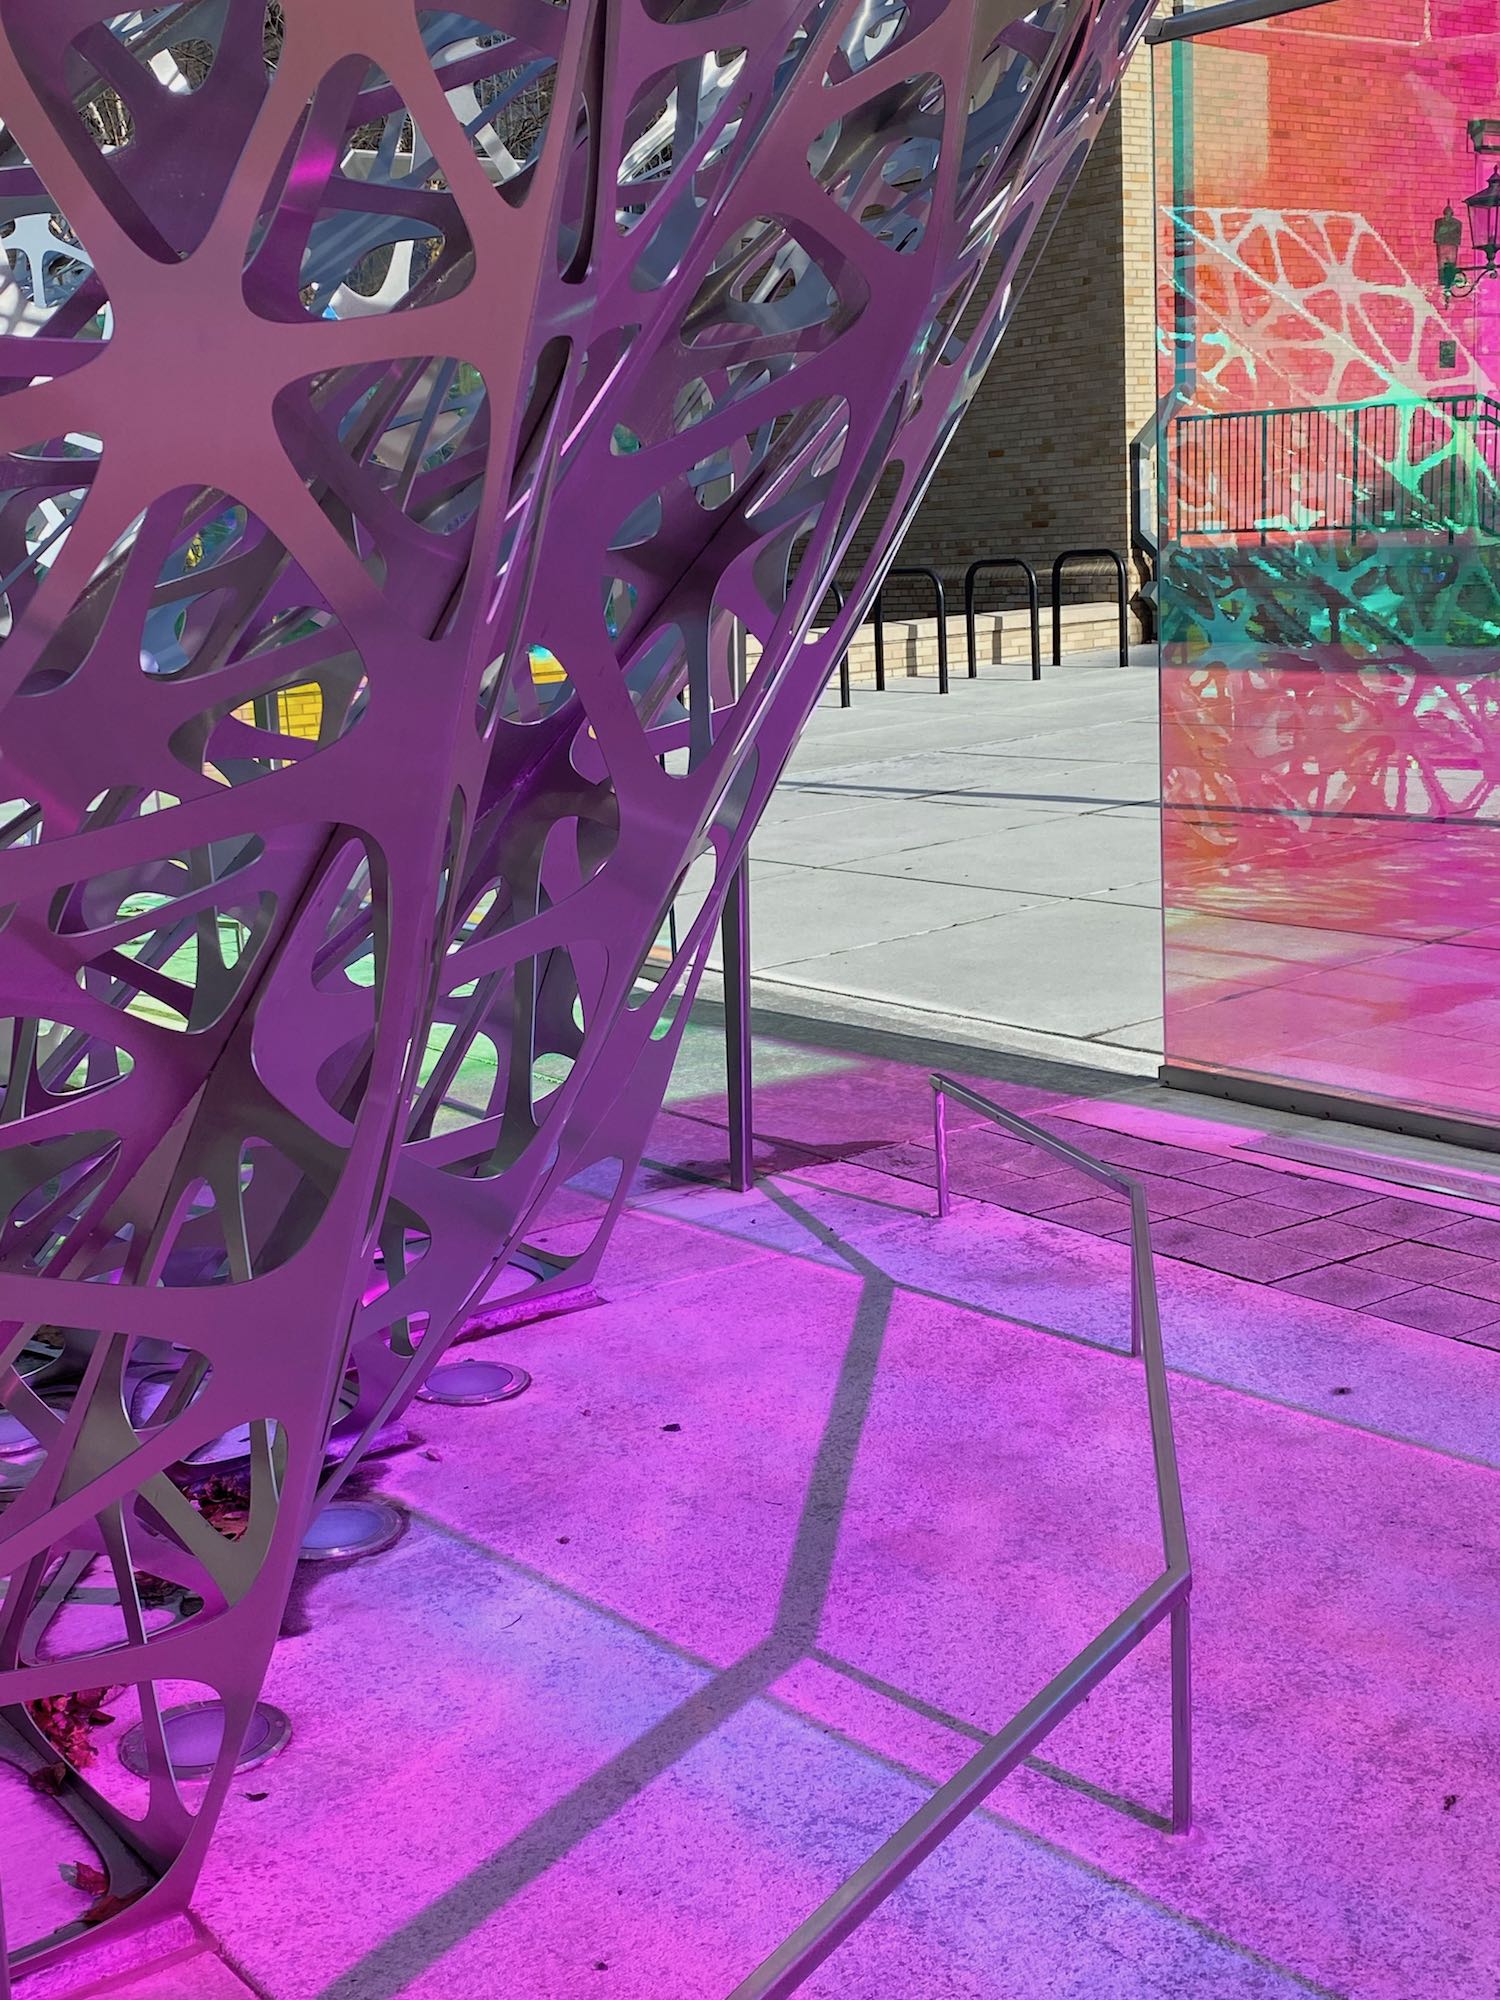 It's the weekend! Number 237, Reflections of Color from PolyForm, an Art Installation at Cornell University